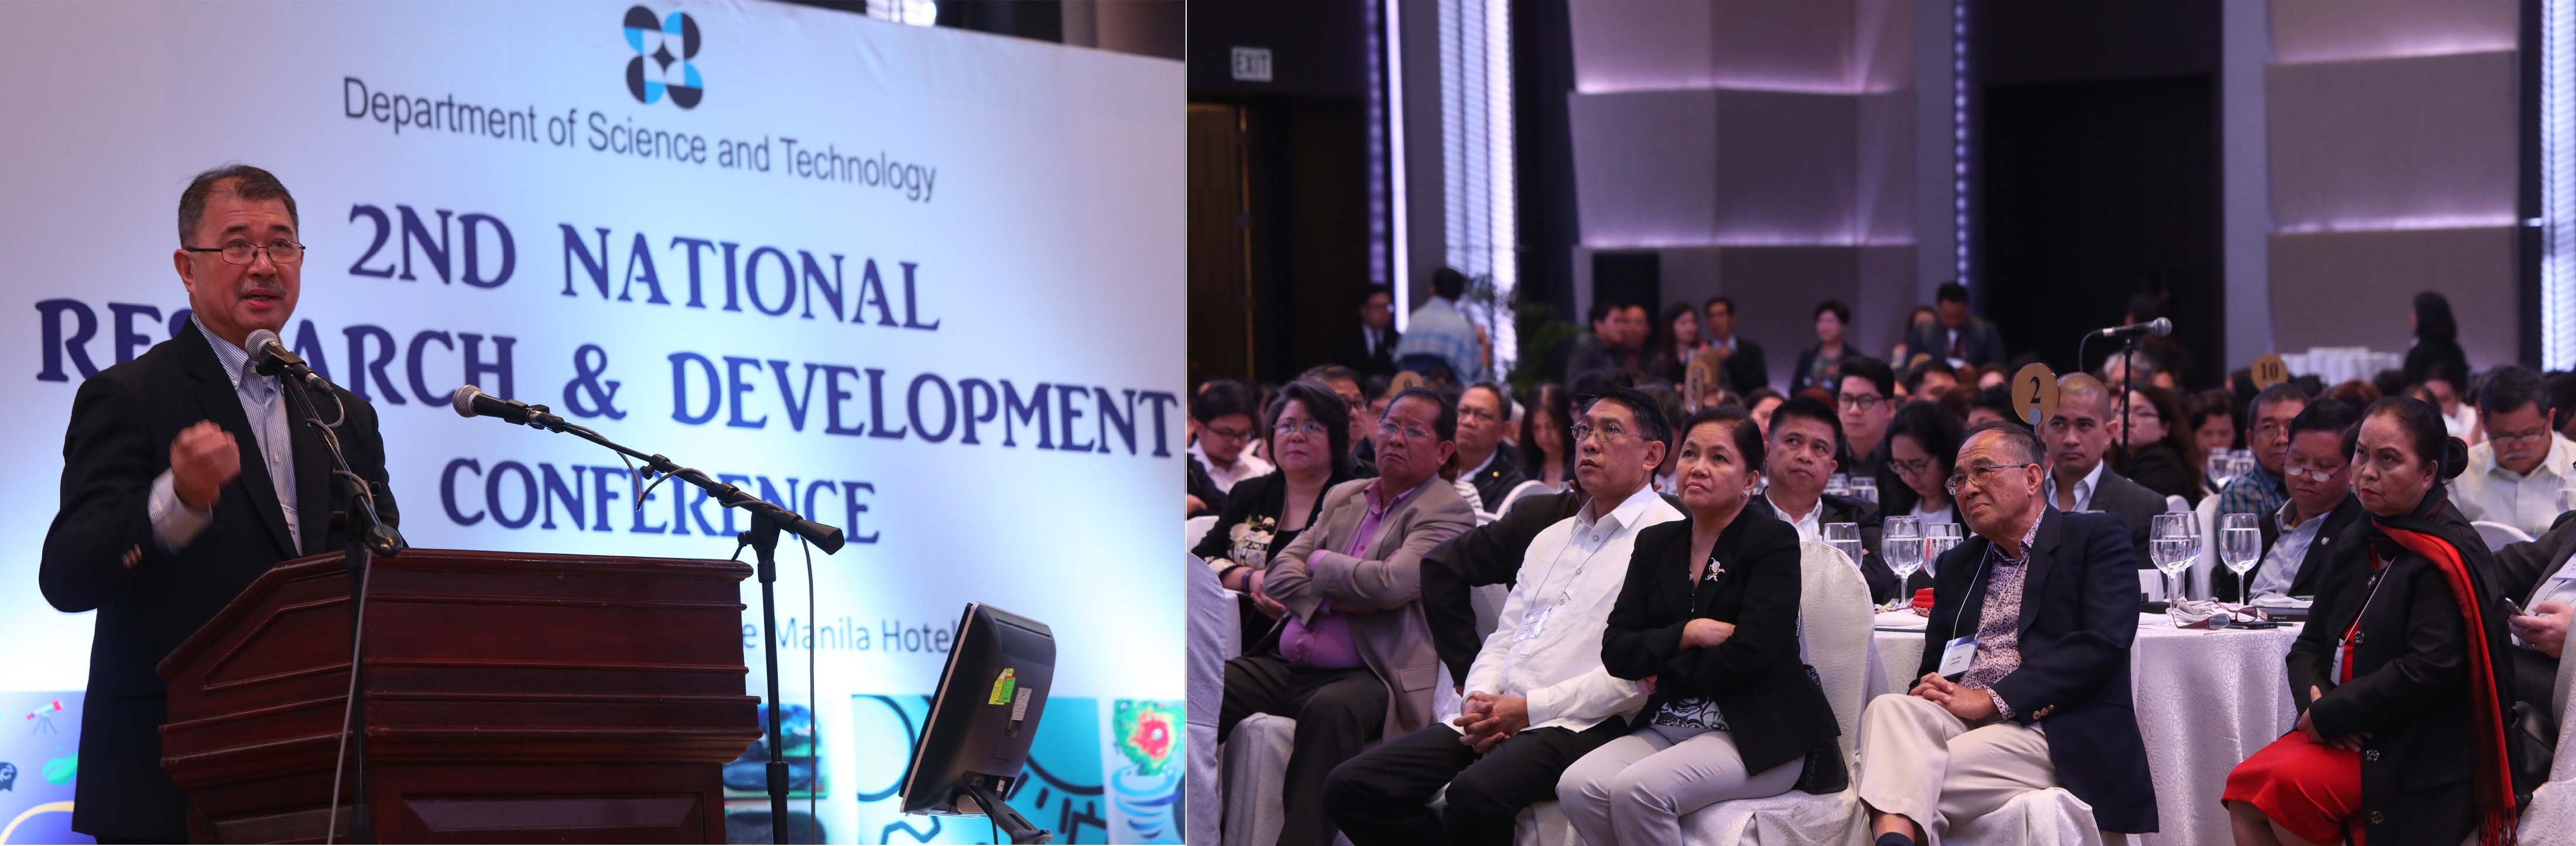 DOST holds 2nd National Research & Development Conference